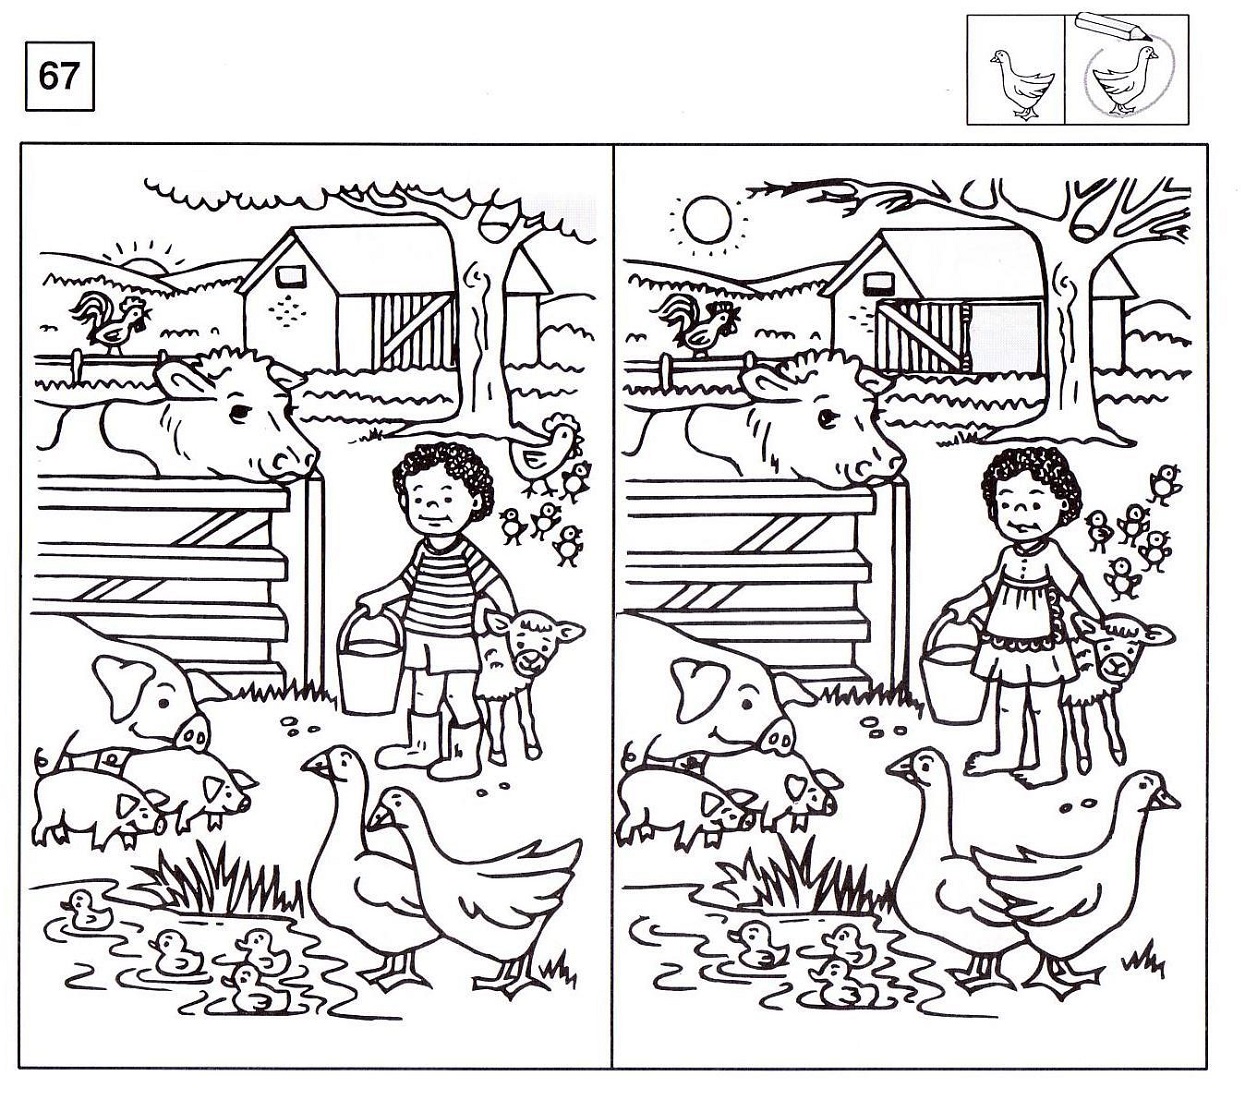 spot the difference worksheets garden